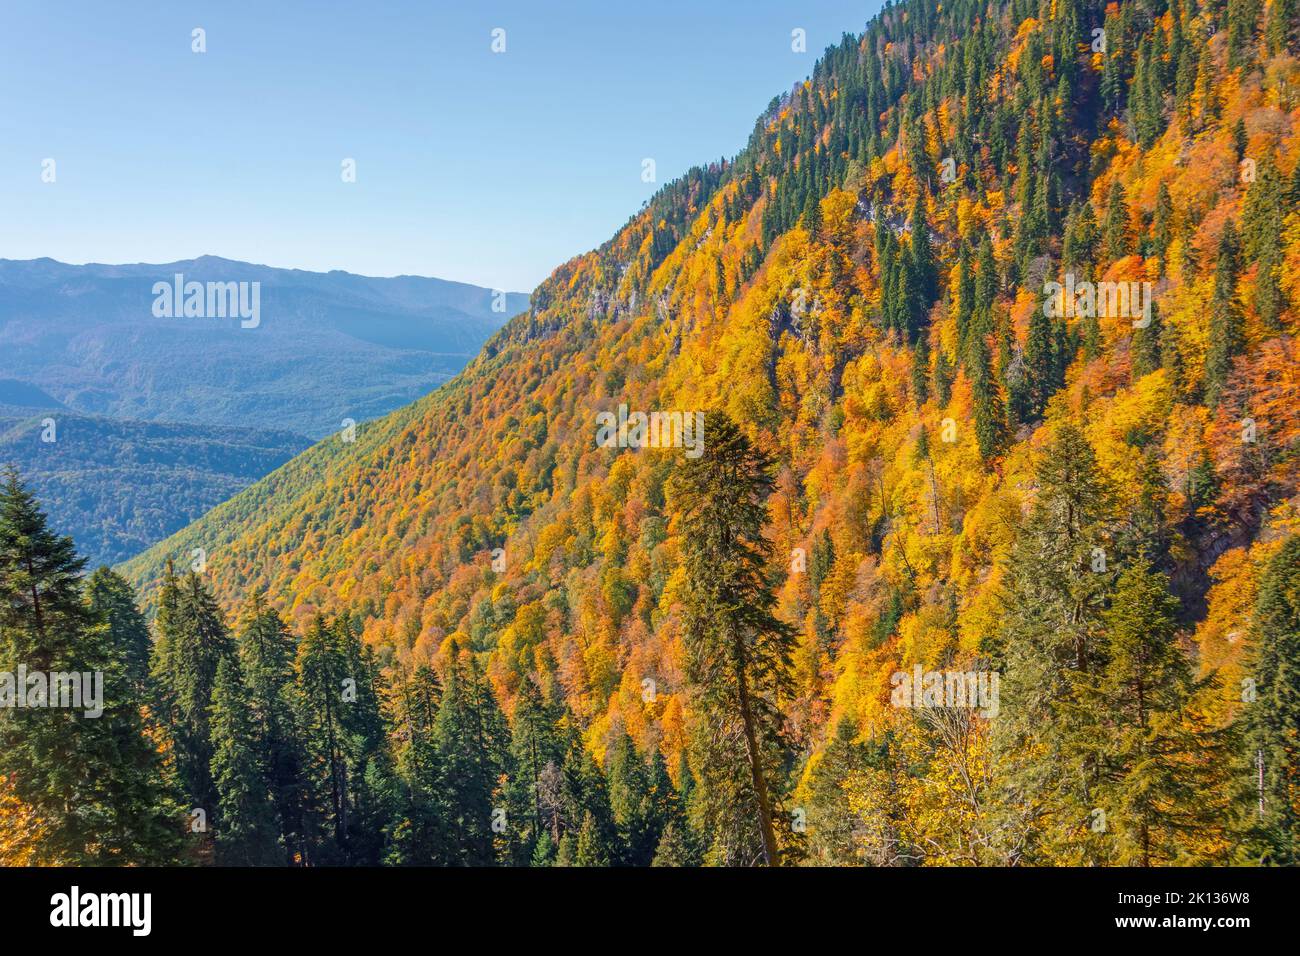 Steep mountain slope and rocky cliffs. Amazing autumn colors of deciduous trees with green conifers in mountain gorges Stock Photo